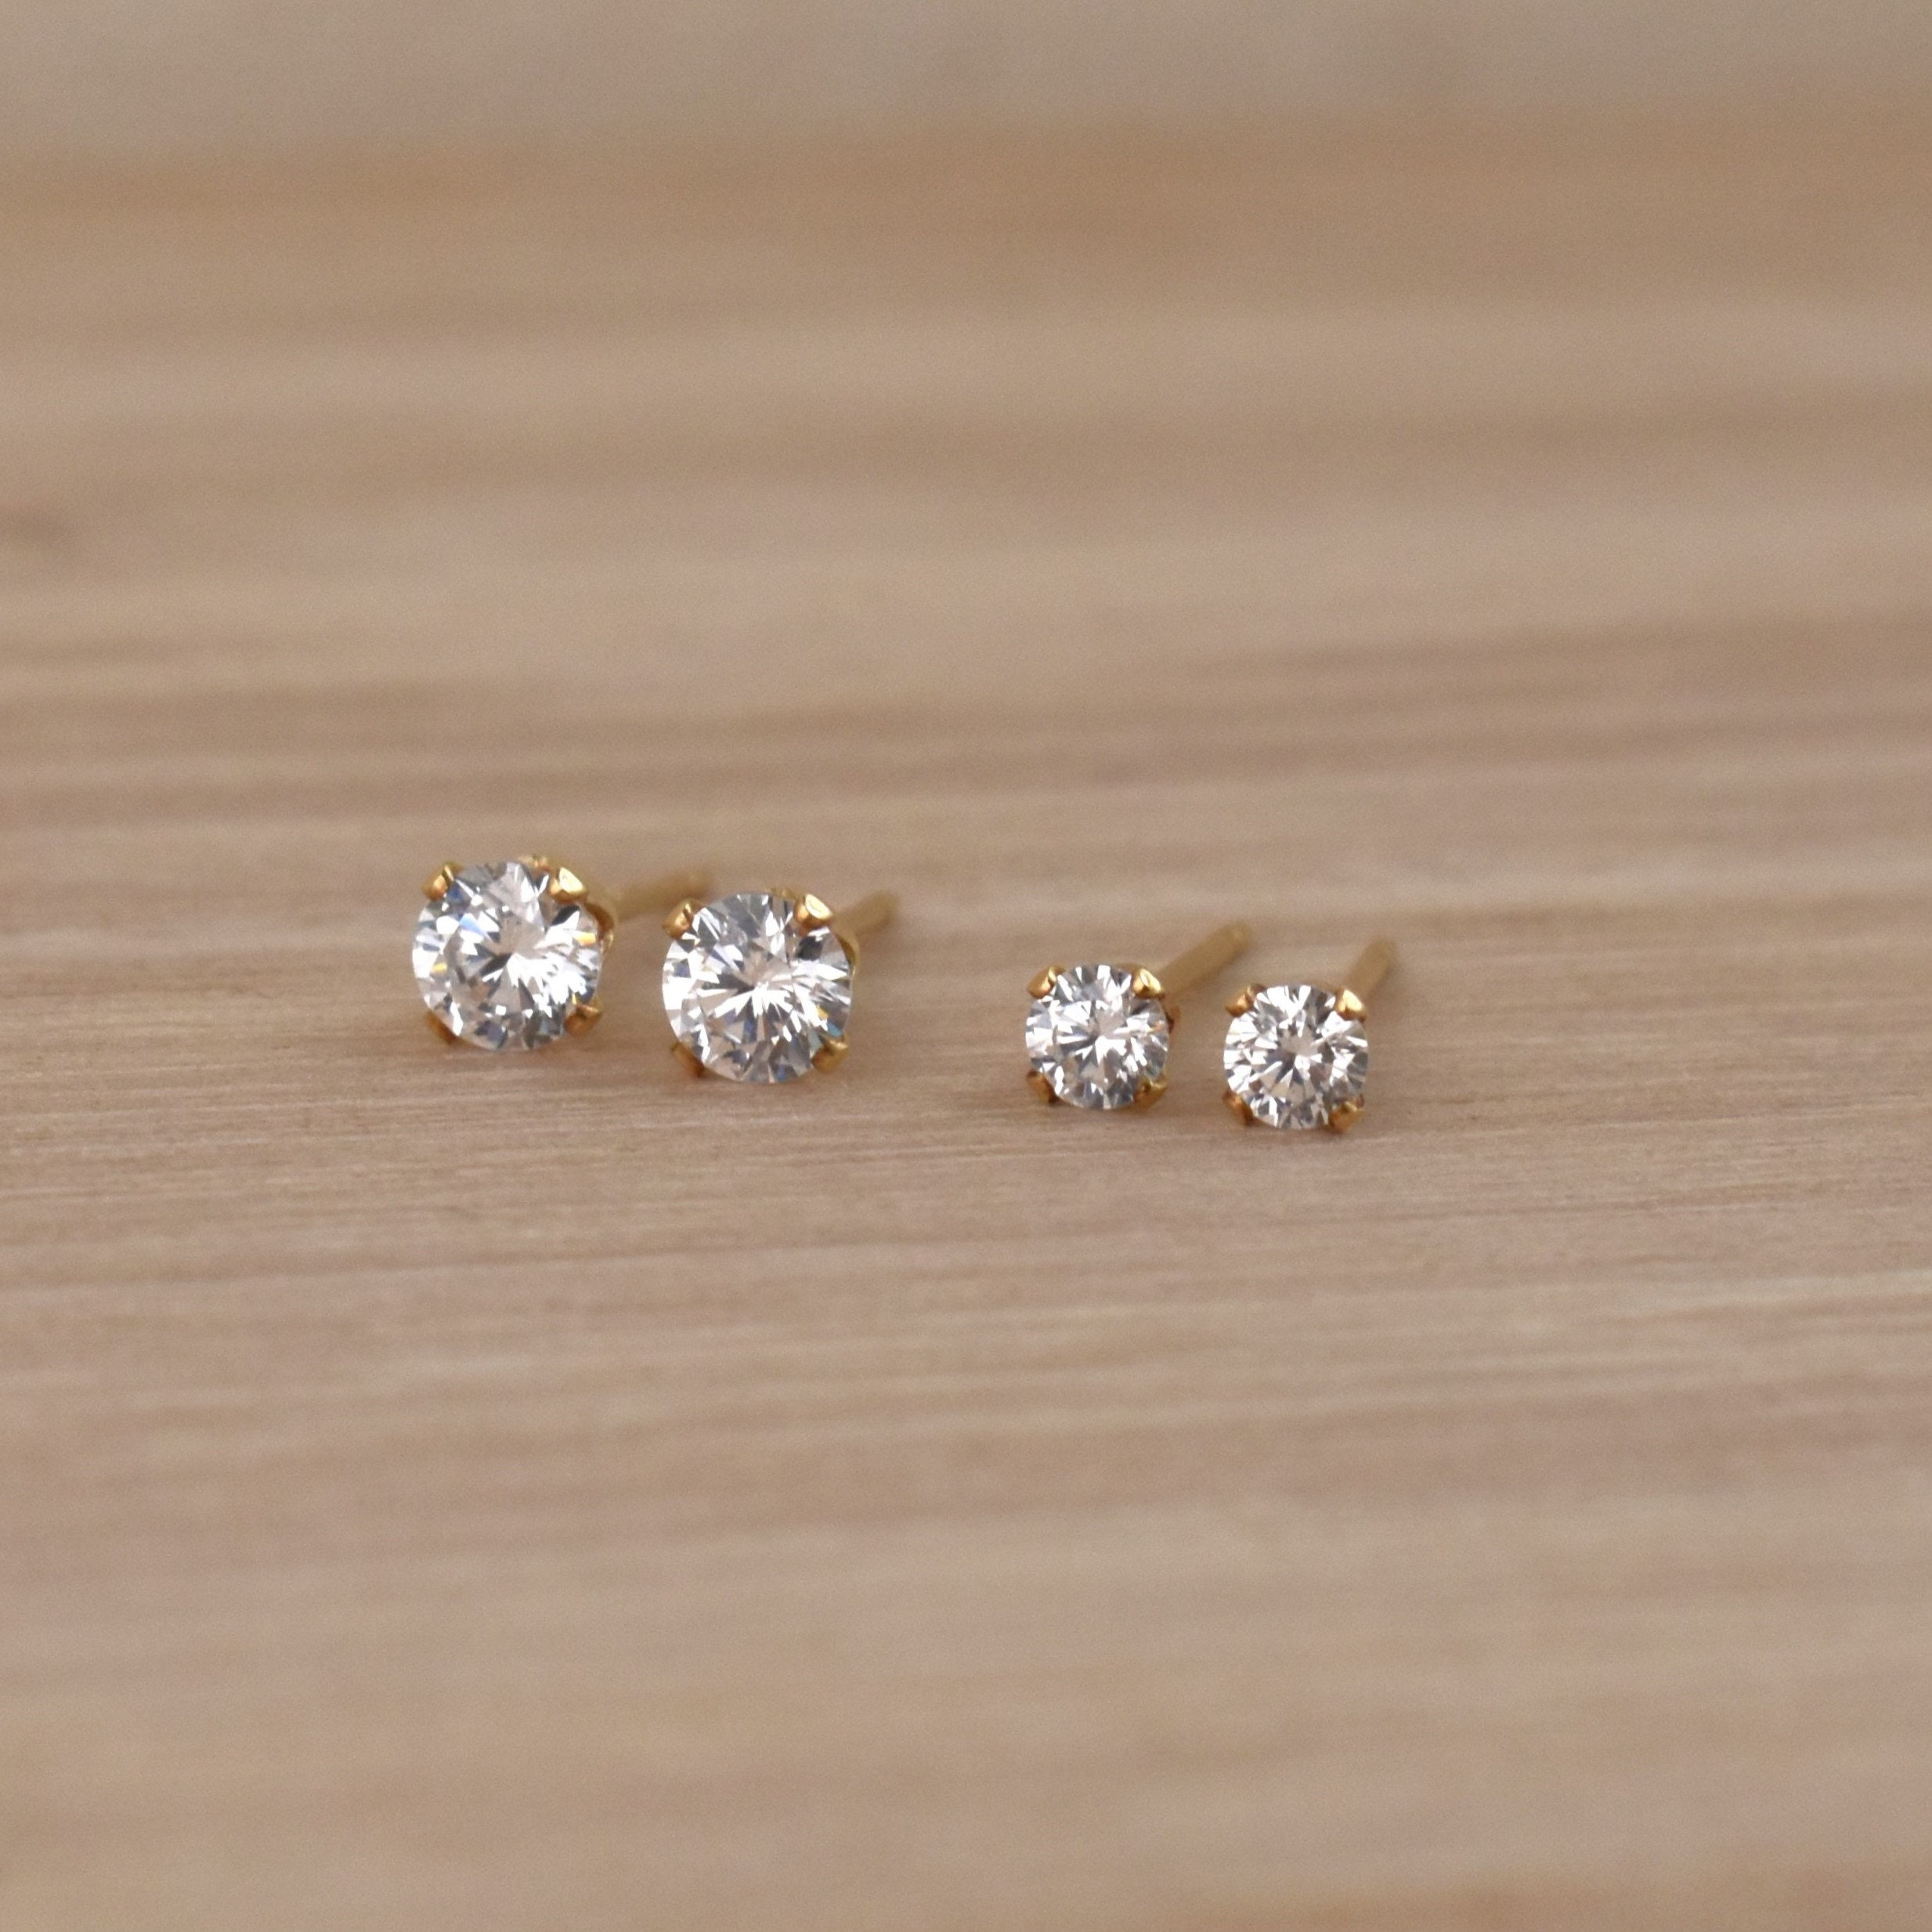  Everyday Gold Filled CZ Diamond Stud Earrings - Tiny Wedding  Zircon Post Earrings for Bride and Bridesmaid - Size 3mm : Handmade Products